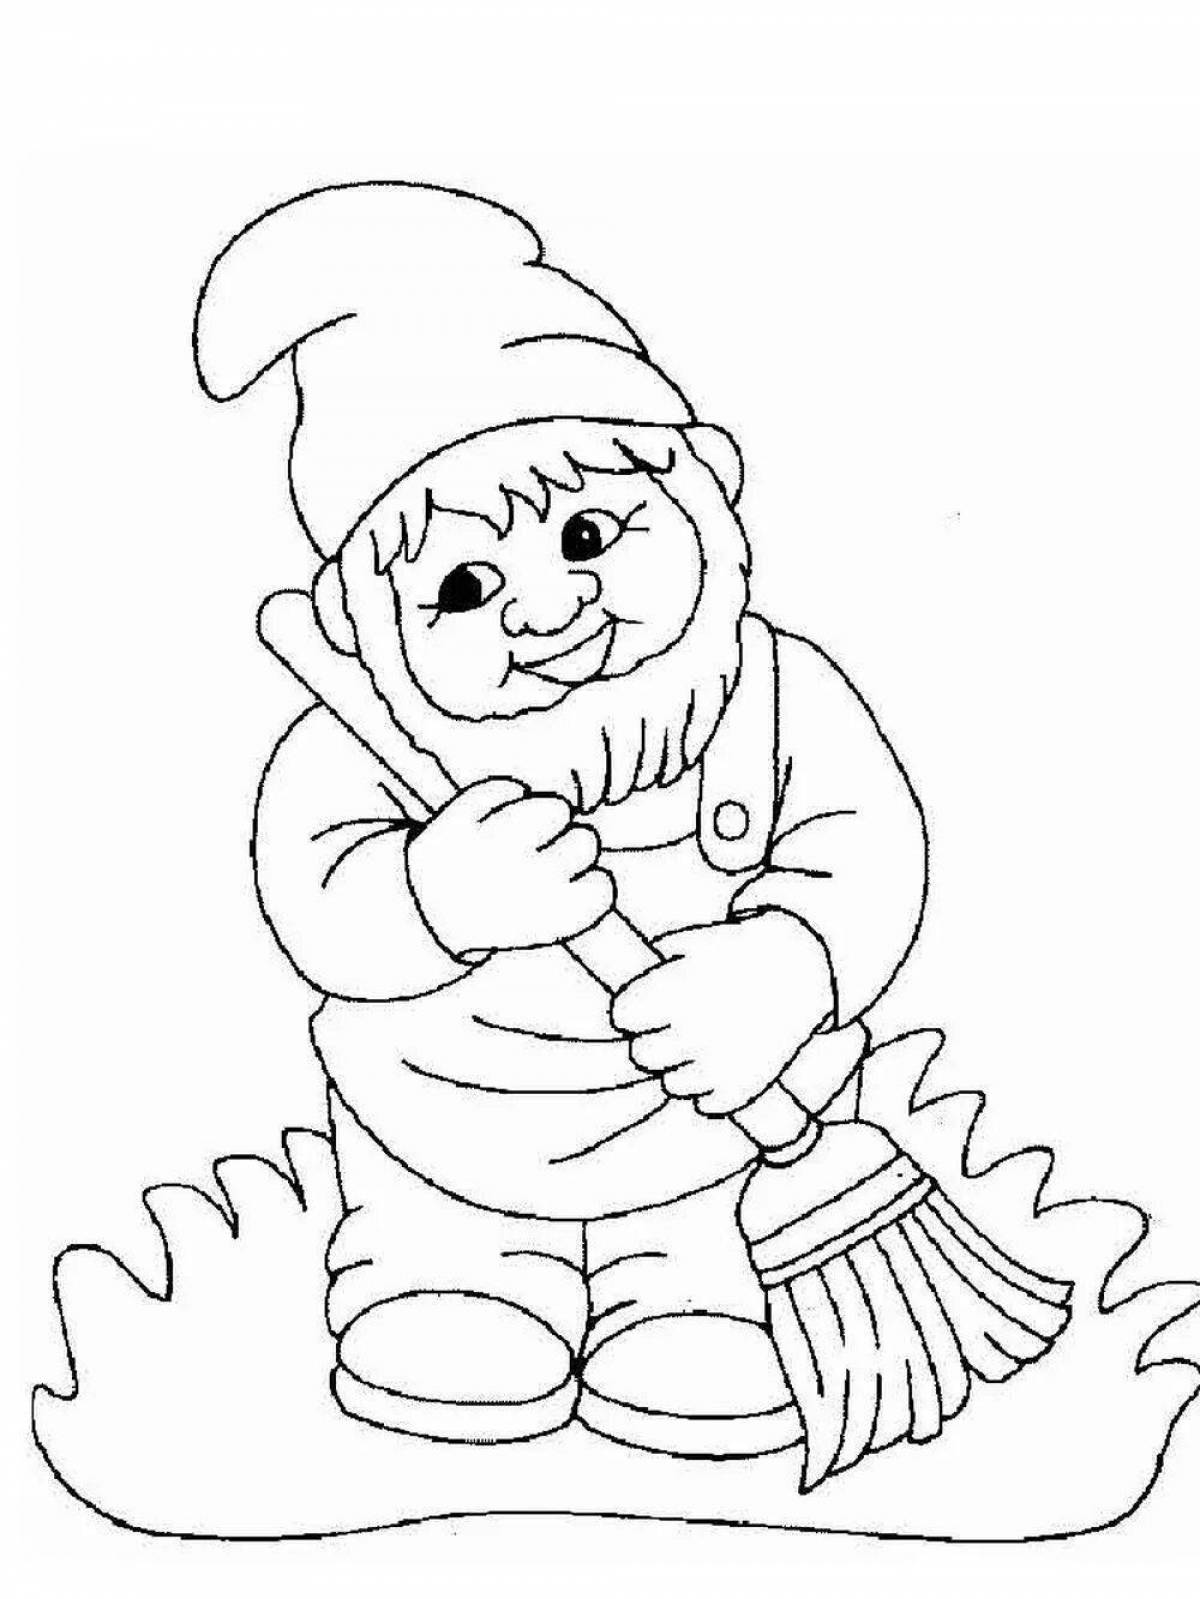 Cute gnome coloring book for 3-4 year olds